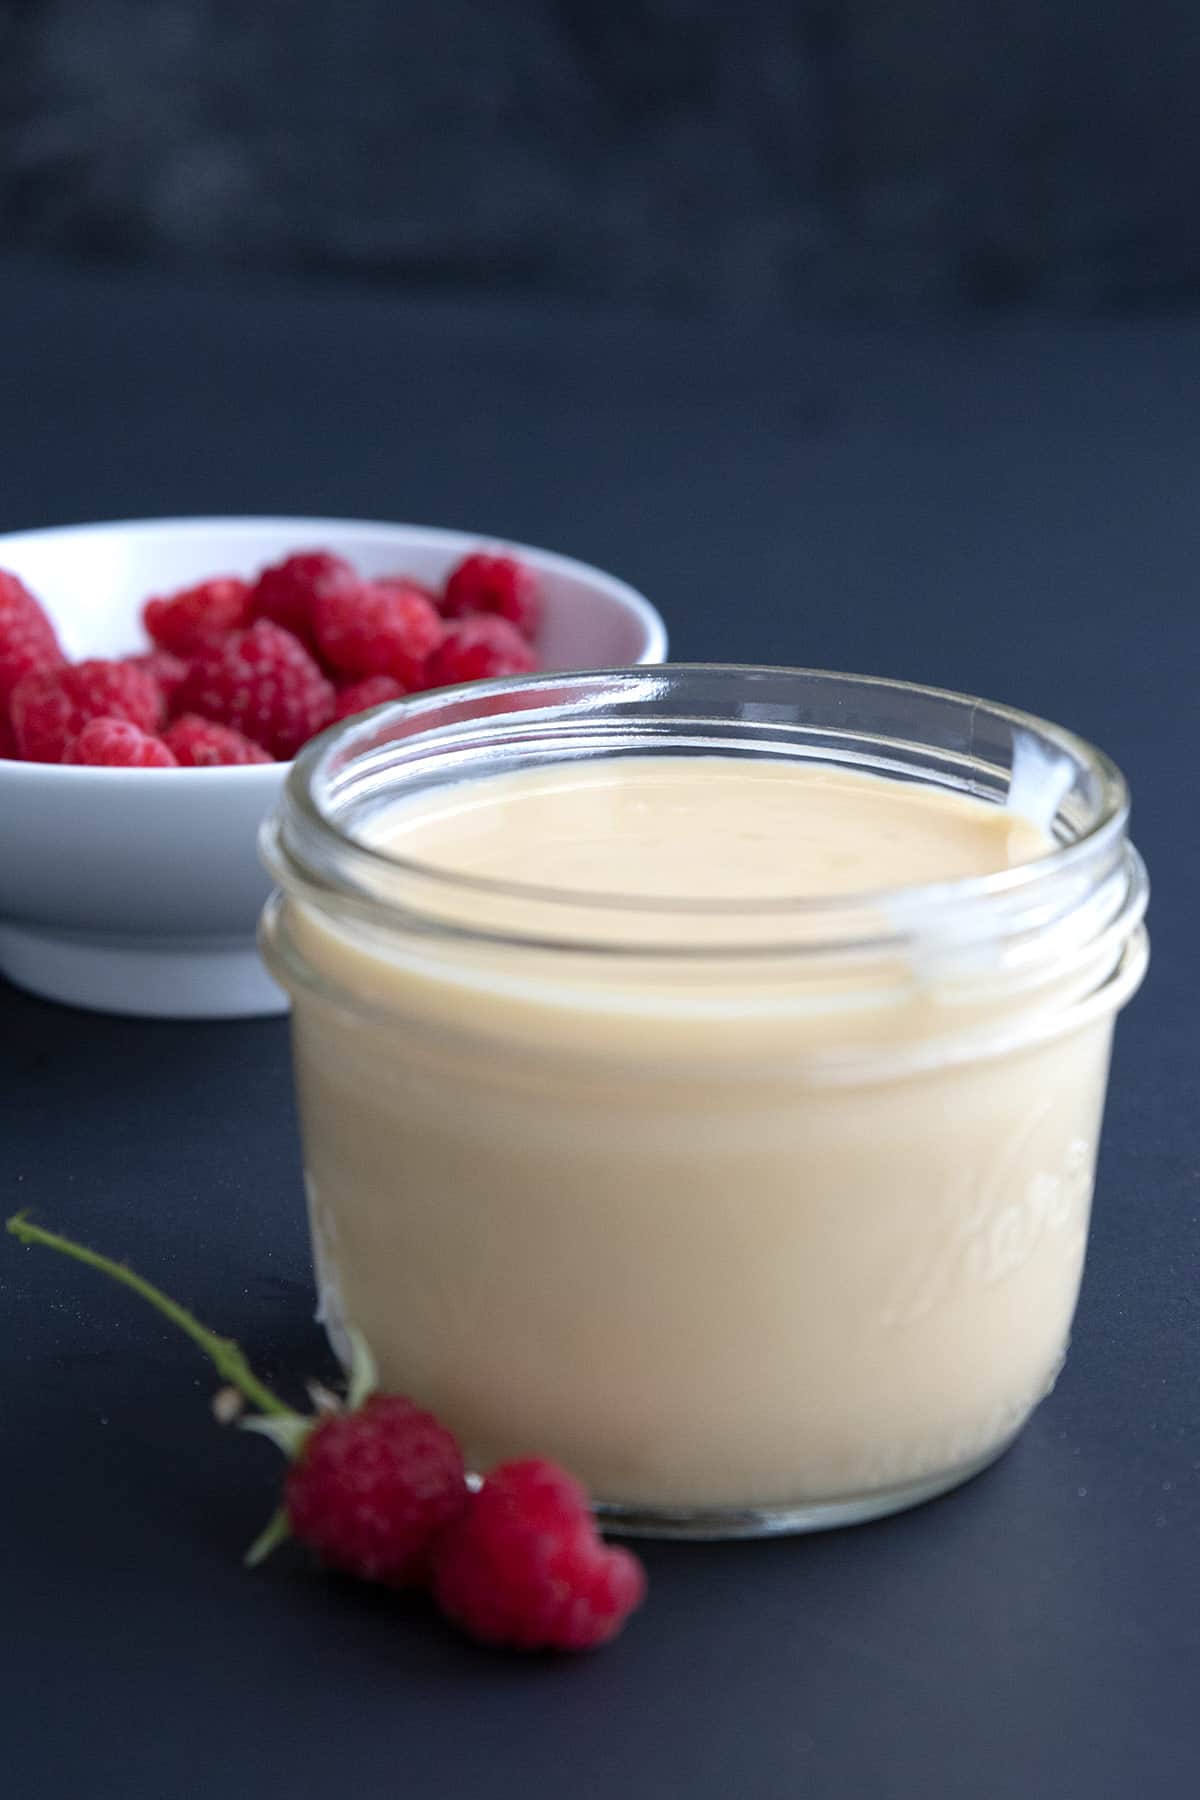 A jar of keto sweetened condensed milk on a dark blue background with a bowl of raspberries in behind.